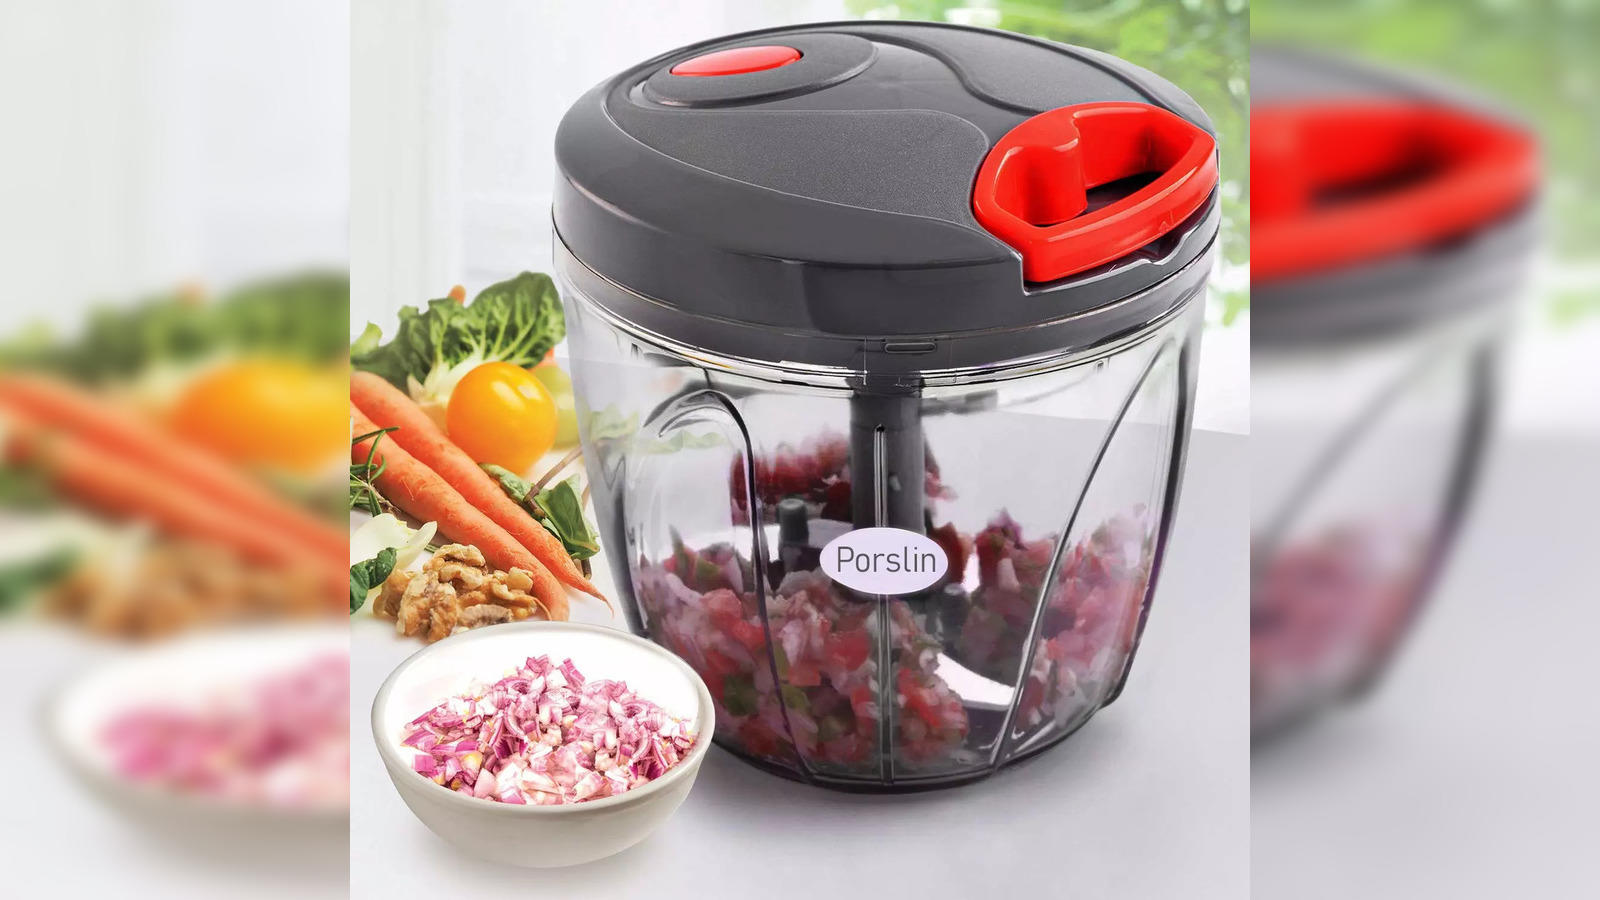 Manual Stainless Steel Compact Extra Sharp Vegetable Chopper with